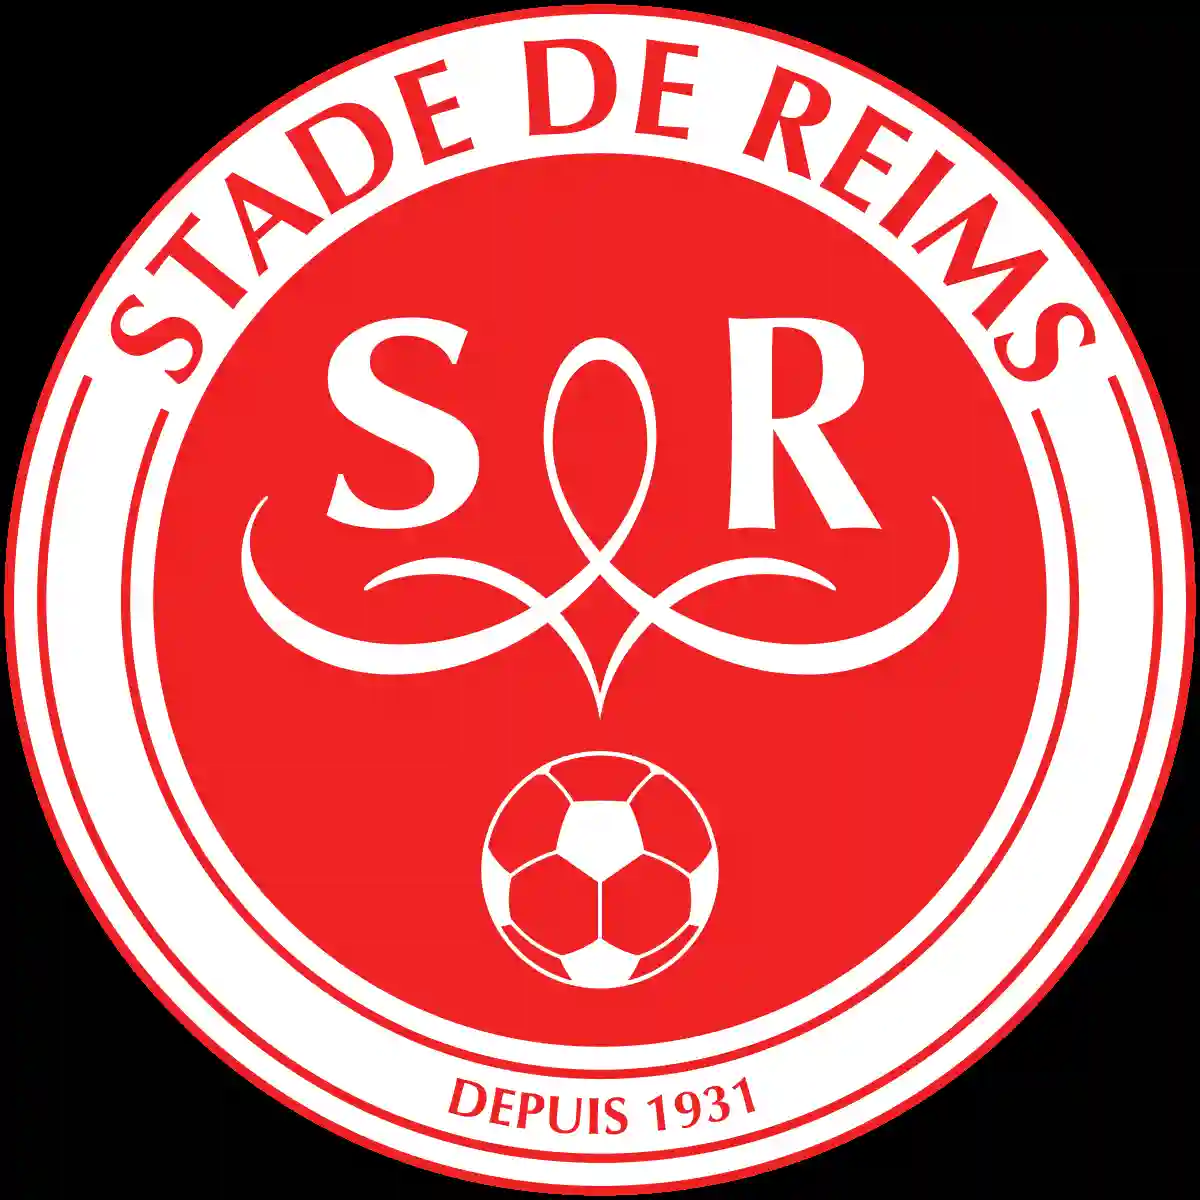 Munetsi's Club Doctor At Stade Reims Commits Suicide After Coronavirus Diagnosis